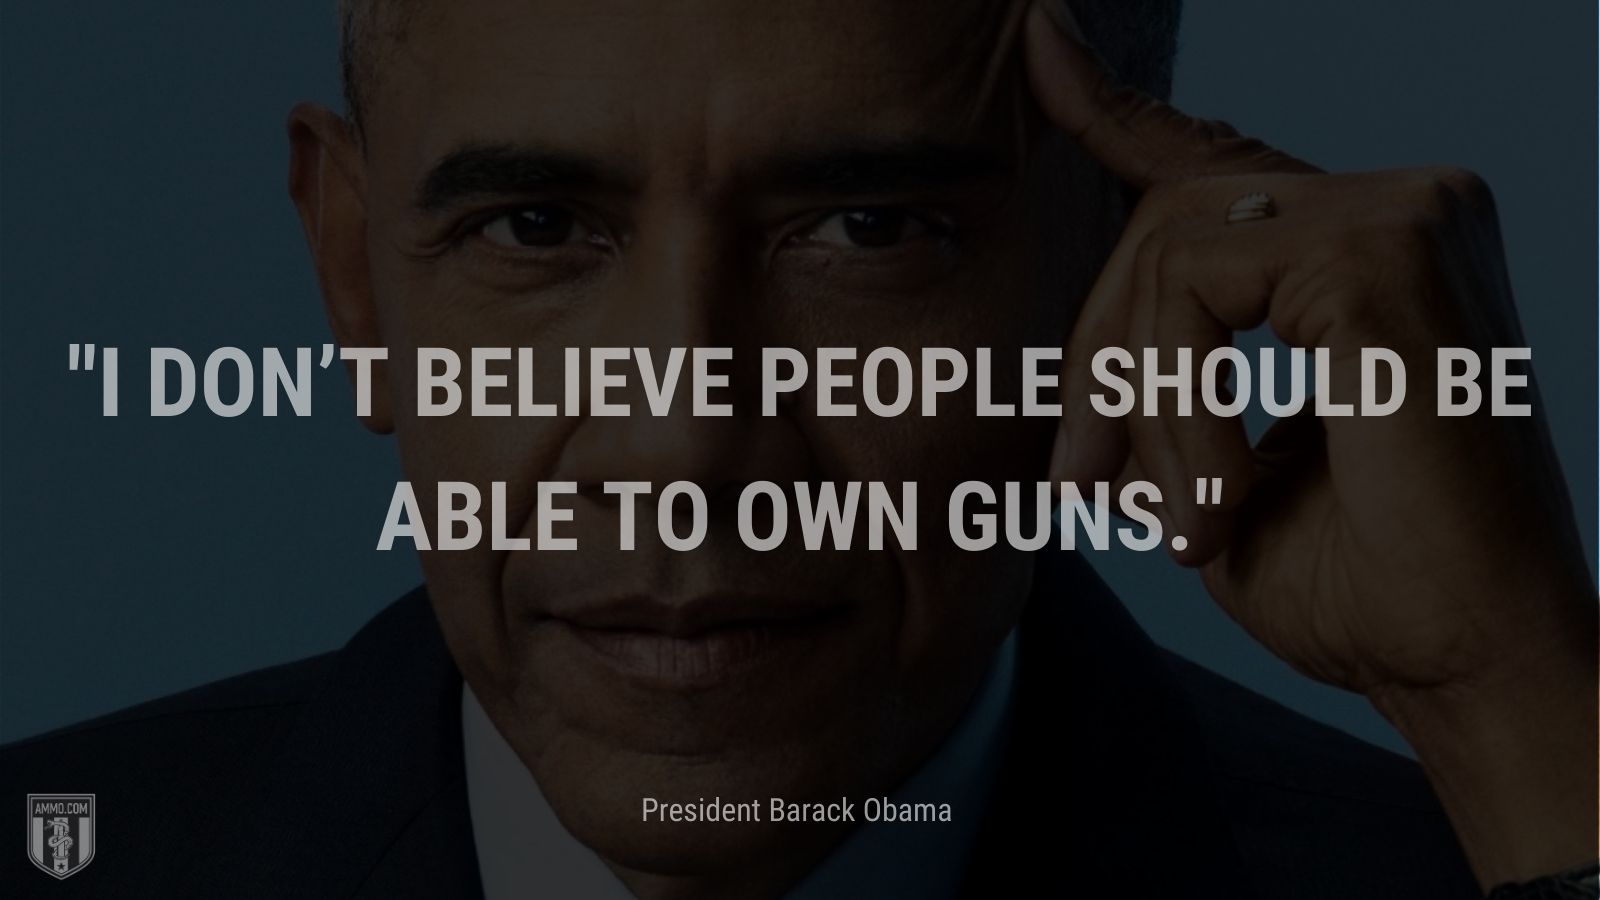 “I don’t believe people should be able to own guns.” -President Barack Obama